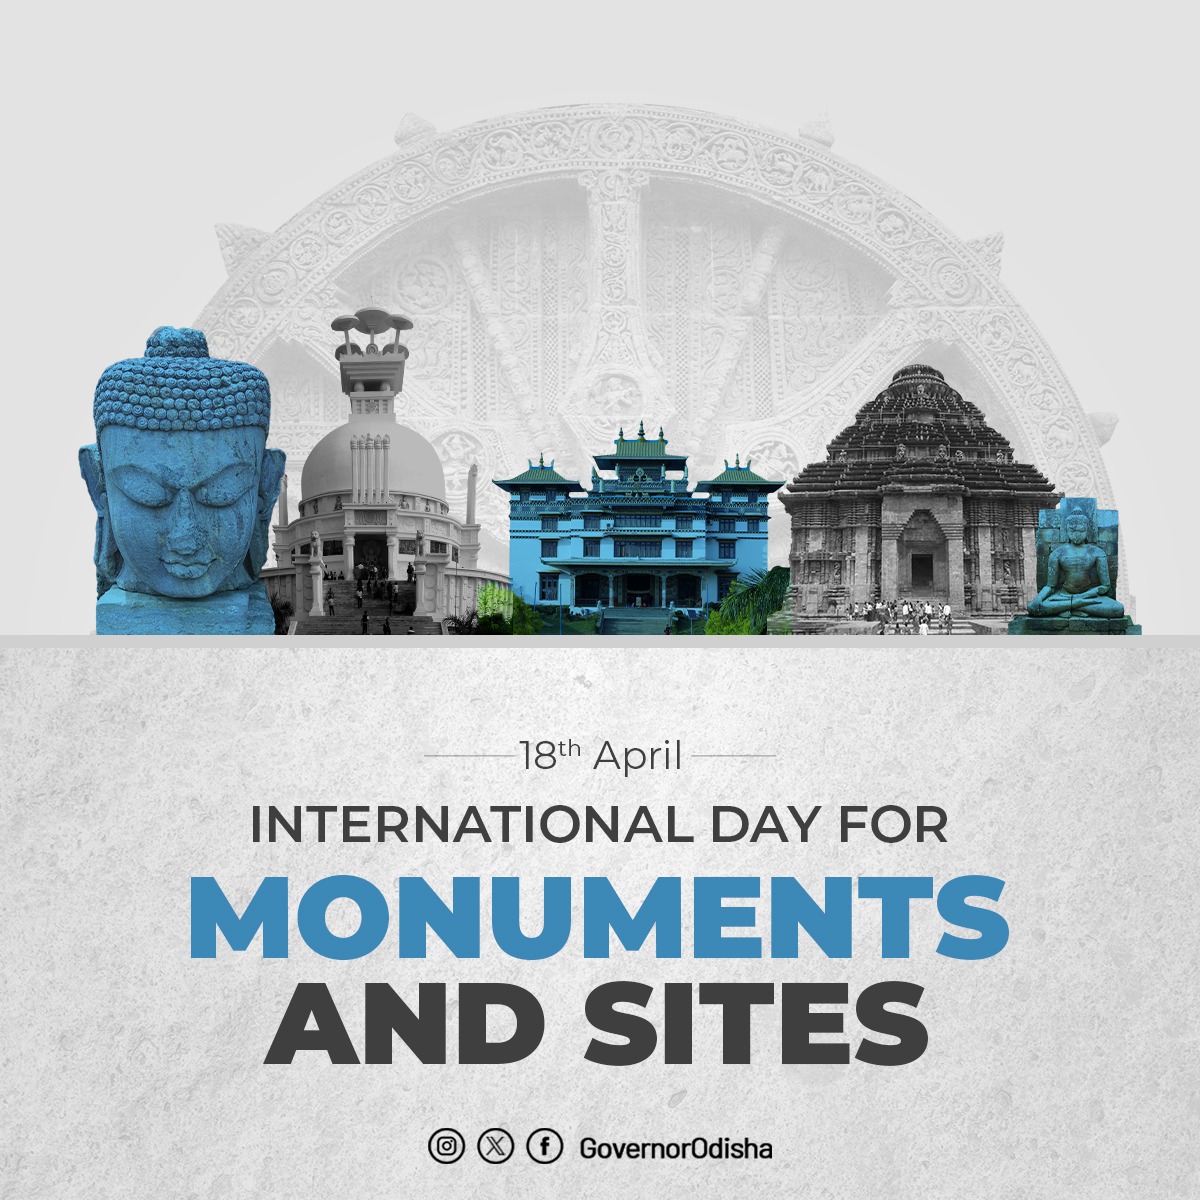 On International Day for Monuments and Sites, Hon'ble Governor exhorts all to pledge not just admire & appreciate these monuments and sites but also actively participate in their conservation, so that our cultural heritage remains a source of pride for all. #WorldHeritageDay